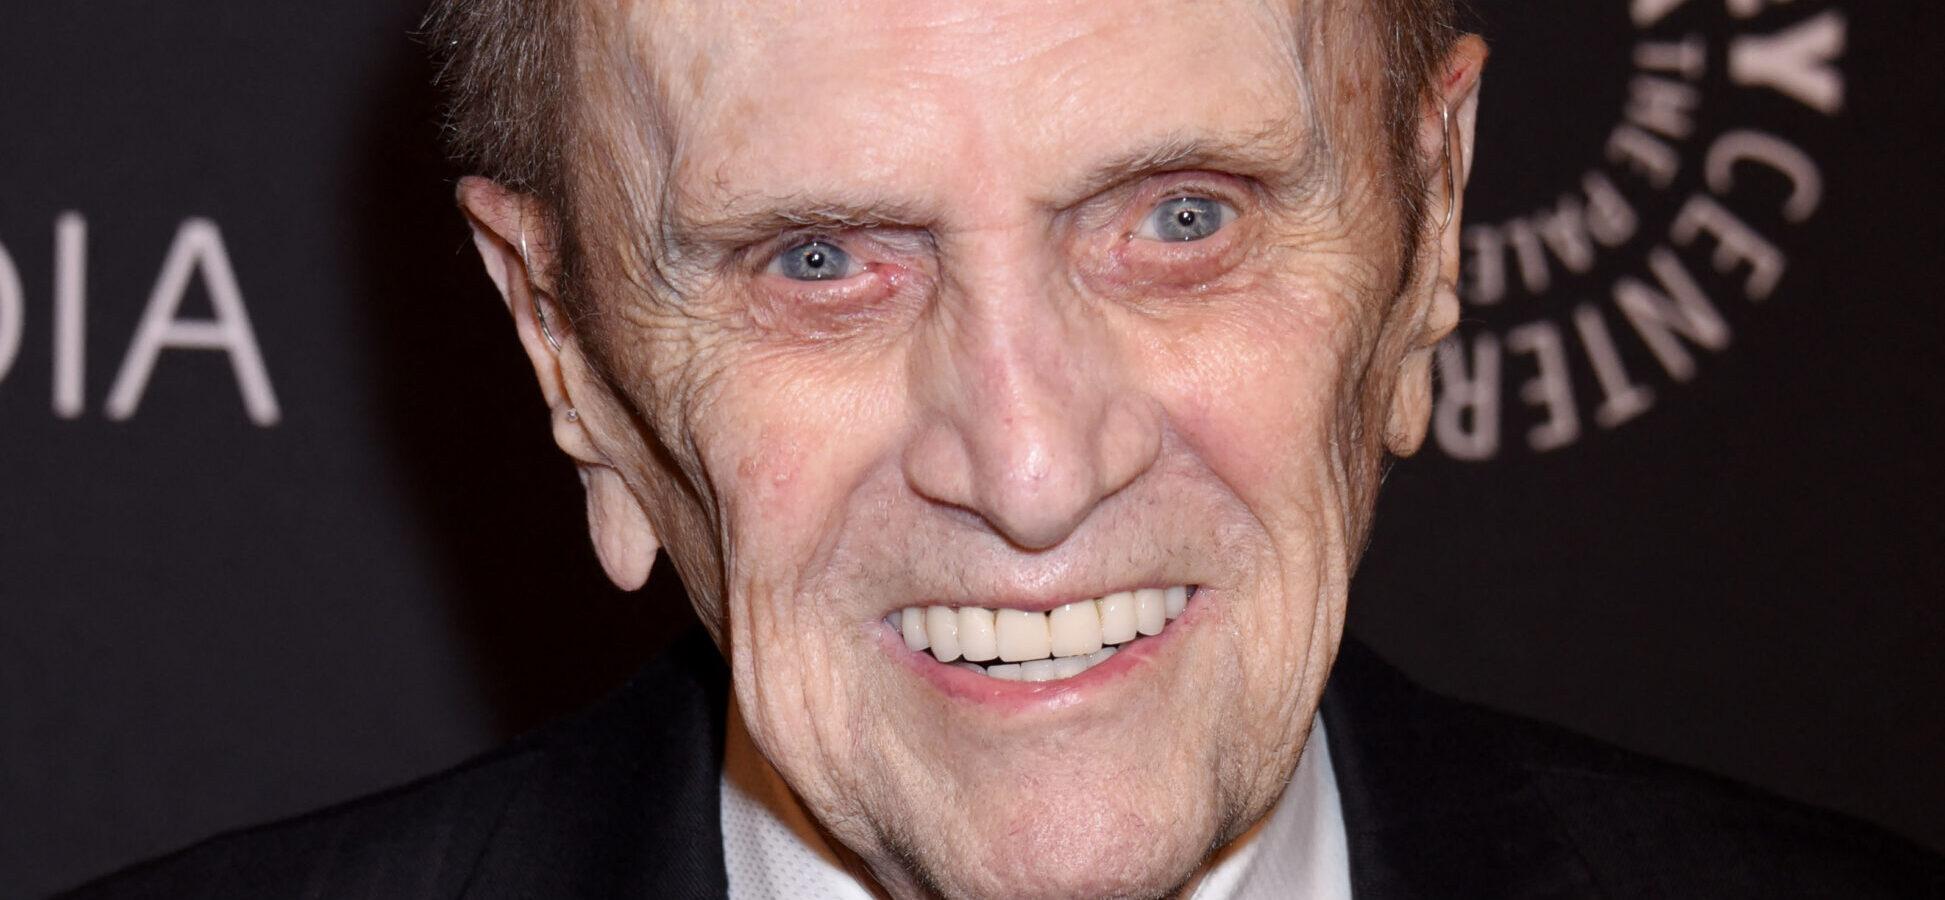 Bob Newhart at The Paley Center For Media's 'The Paley Honors: A Special Tribute To Television's Comedy Legends'